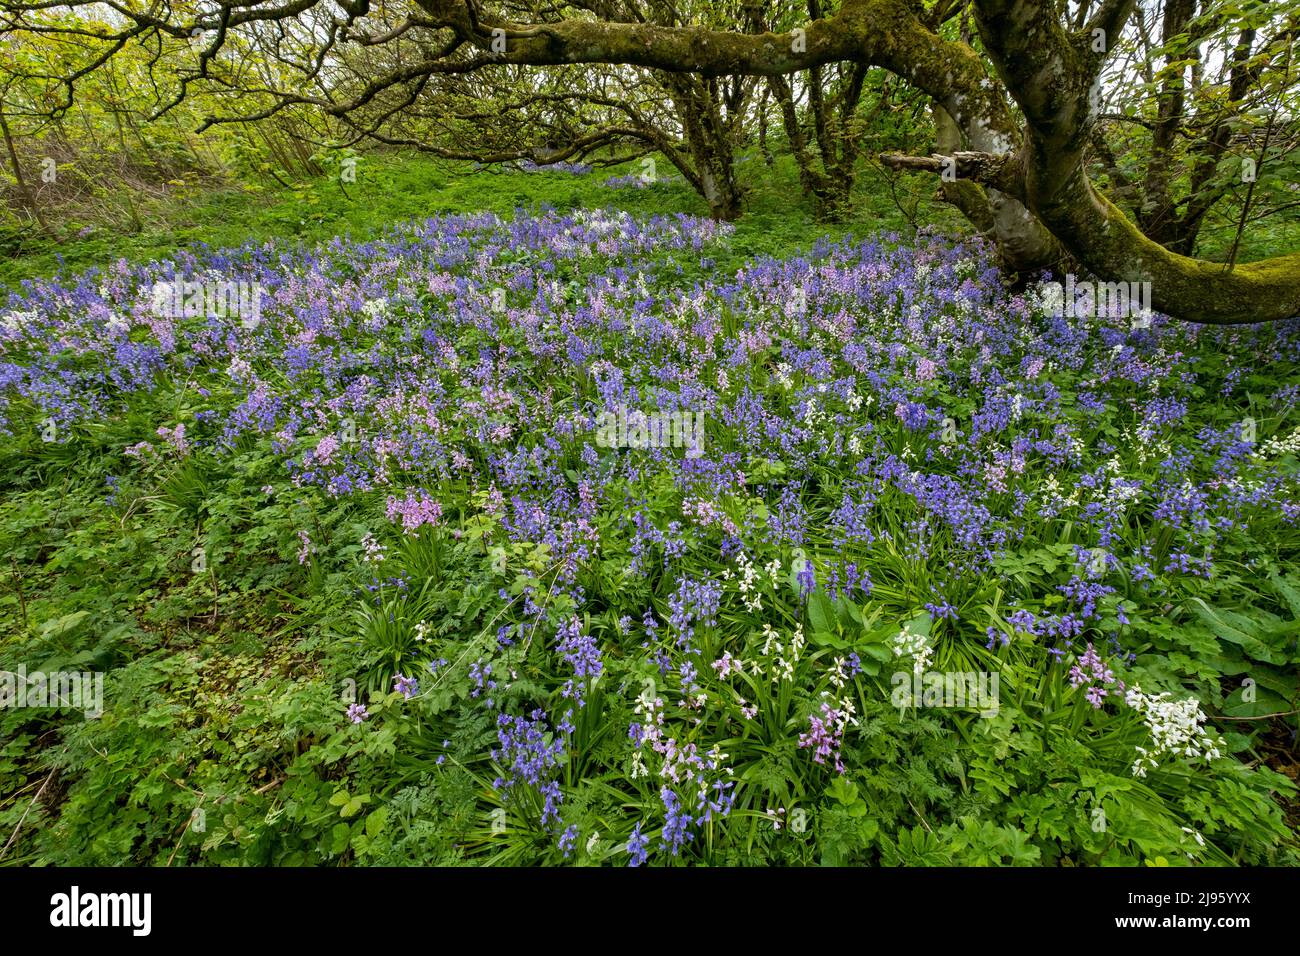 A carpet of Bluebells ( Hyacinthoides non-scripta) cover the ground in a small woodland at Gyre, Orkney Islands, Scotland. Stock Photo